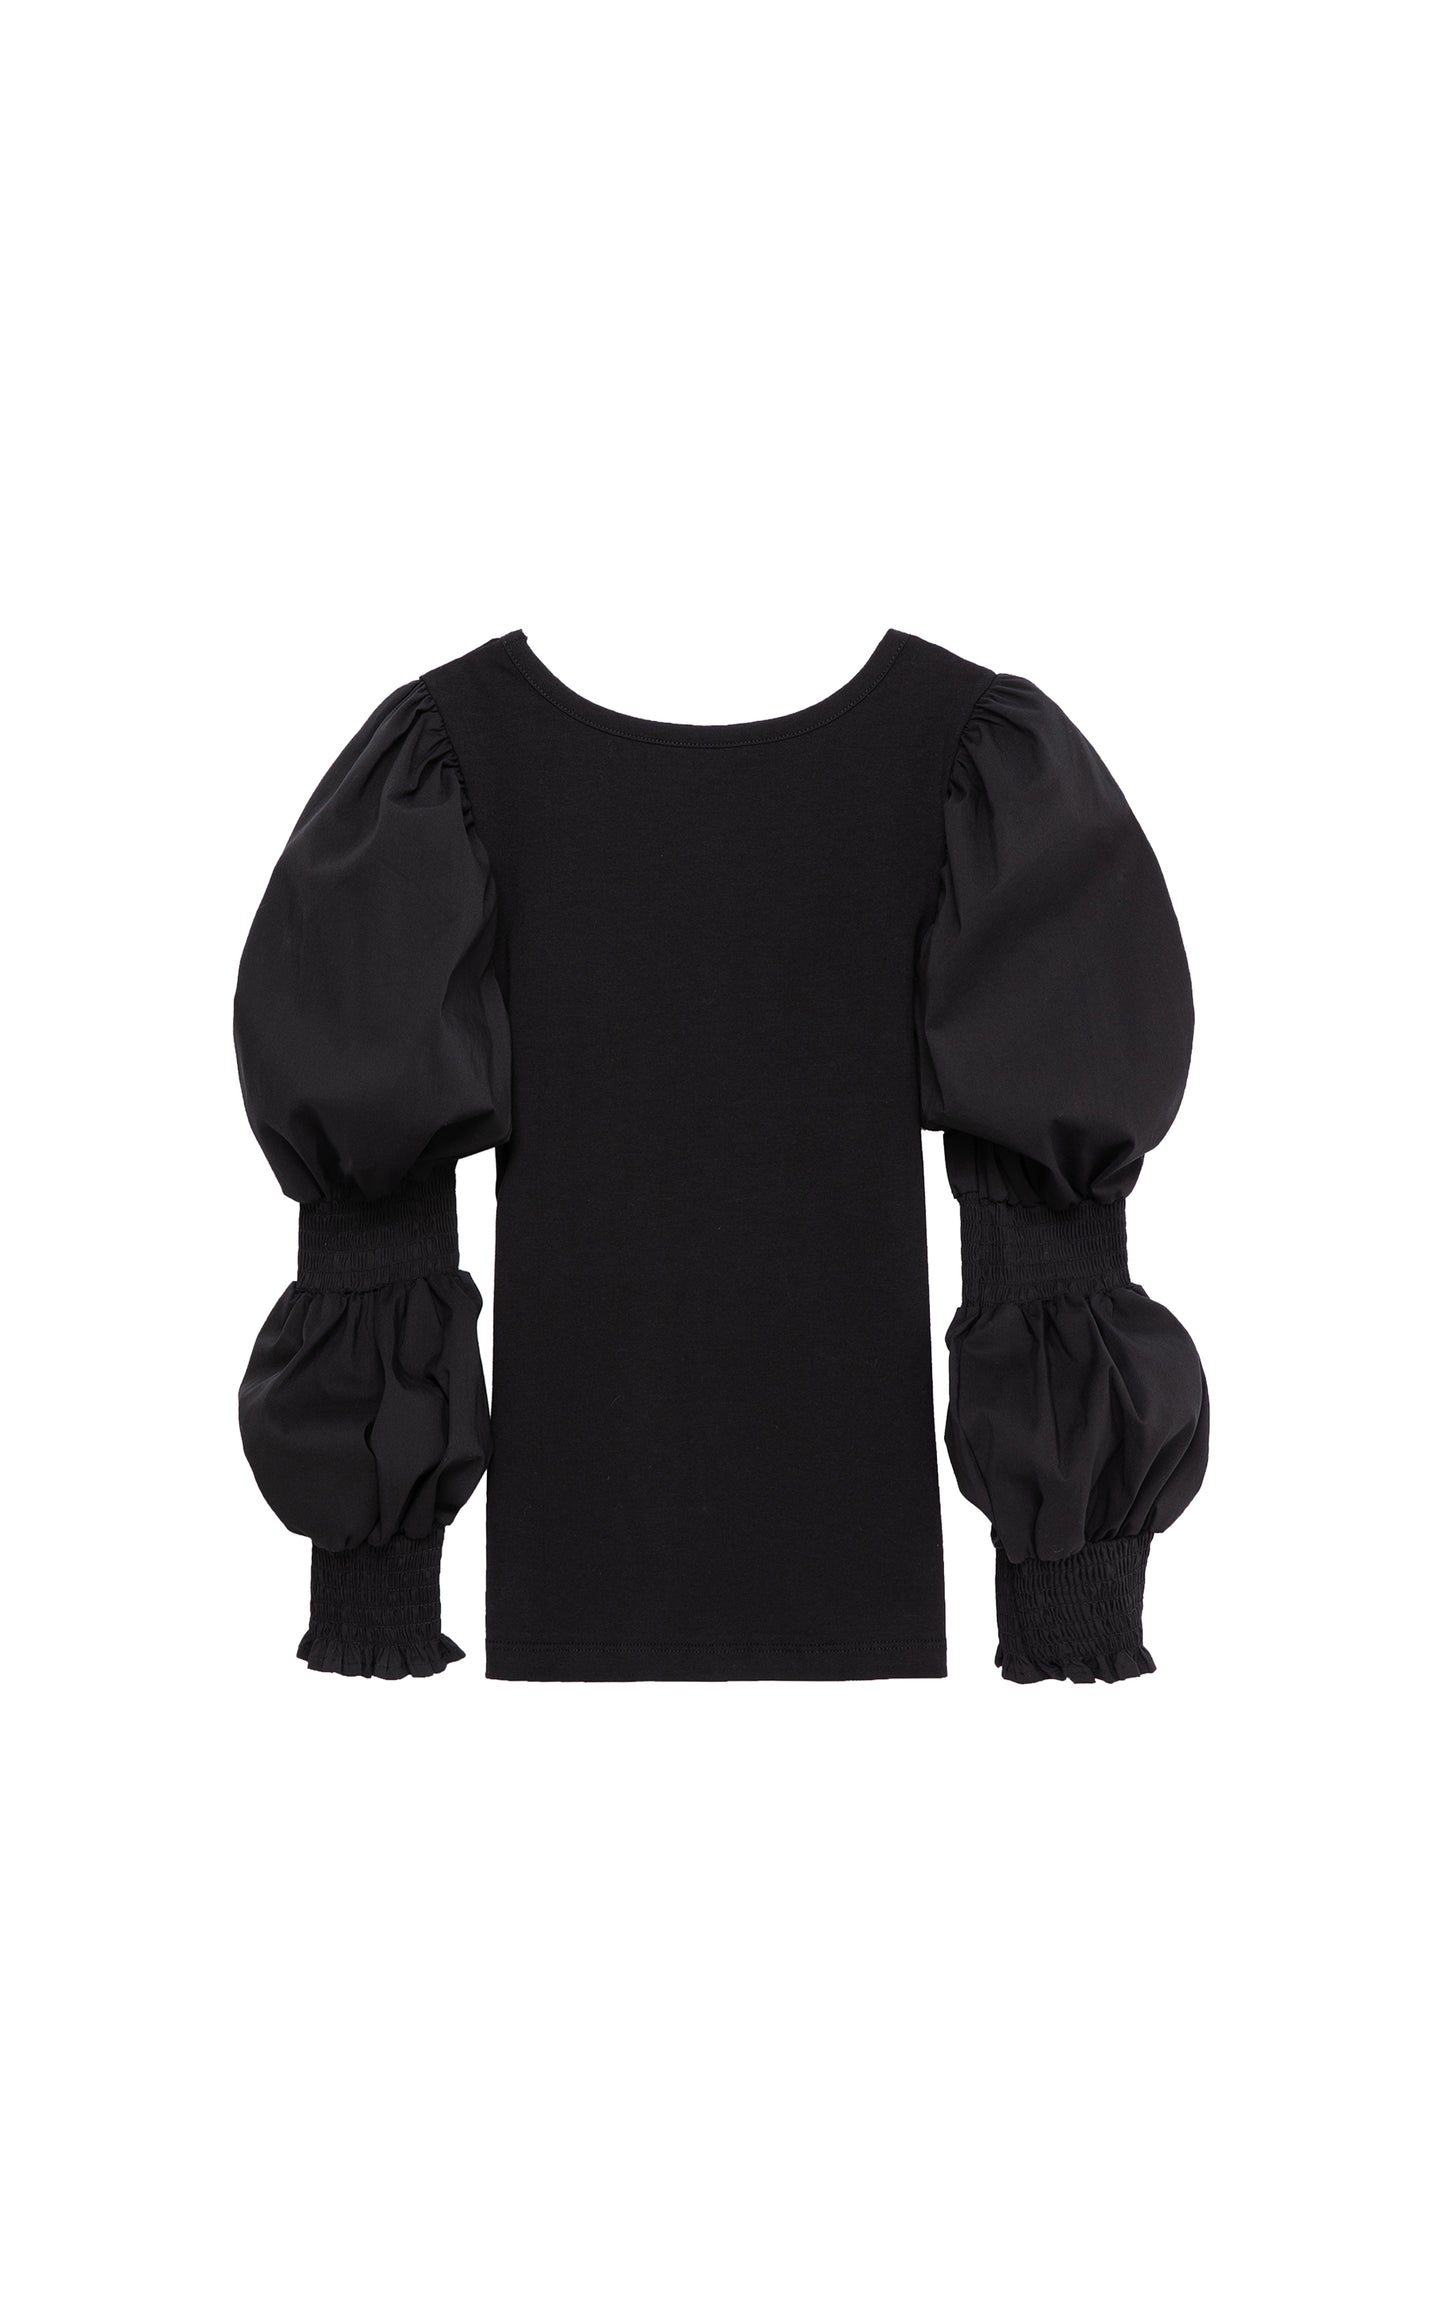 BACK OF BLACK LONG-SLEEVE TOP WITH SMOCKING ALONG THE SLEEVES